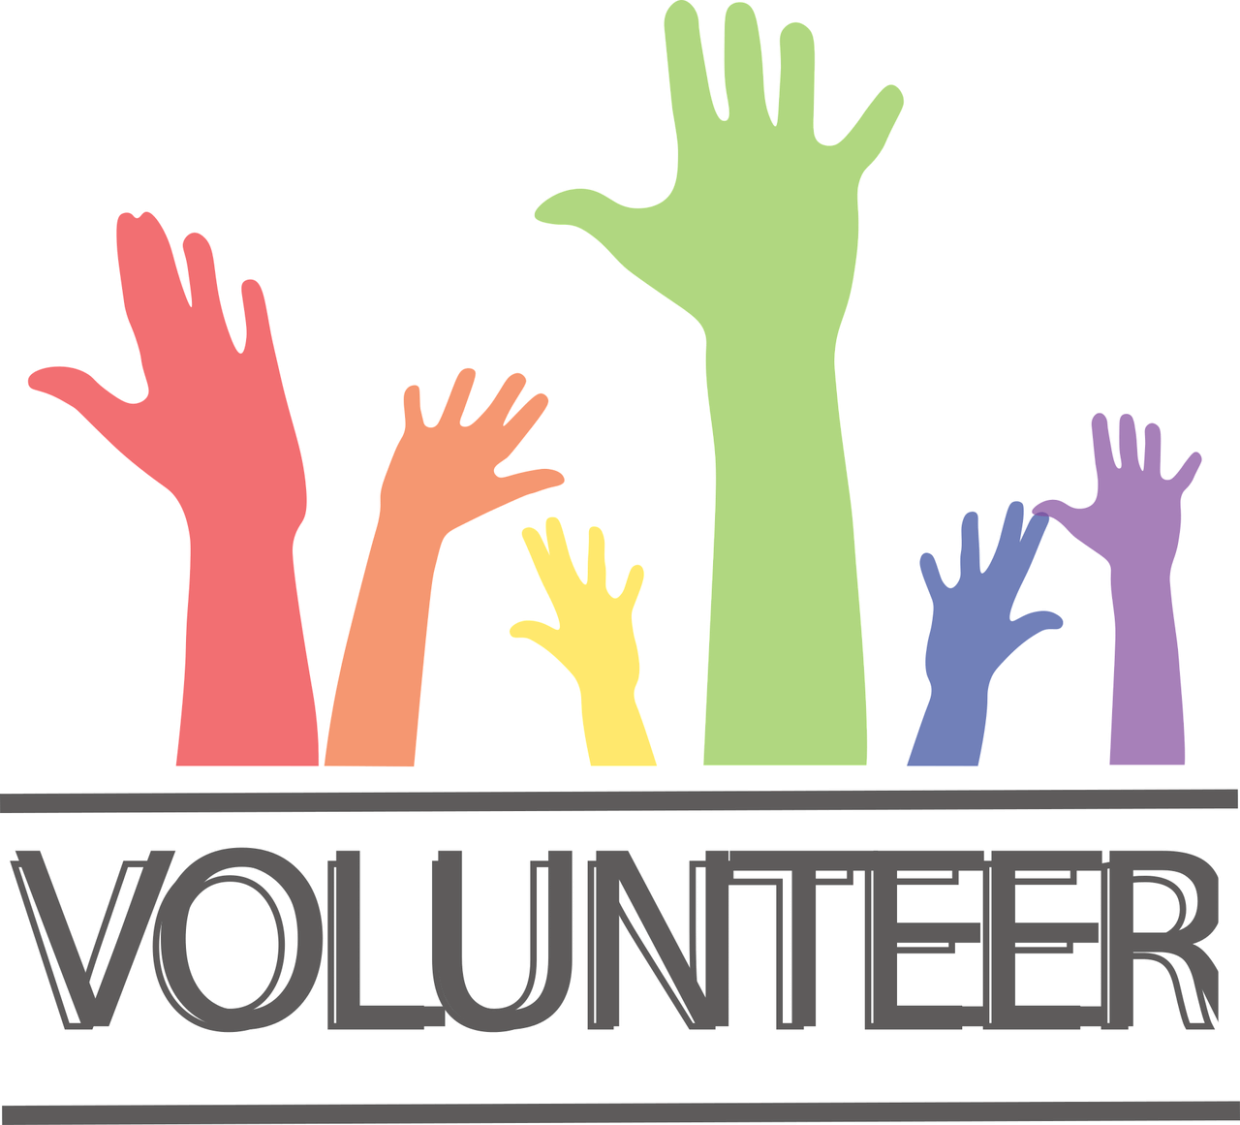 Raised hands in varying colors of the rainbow appear above the word Volunteer.